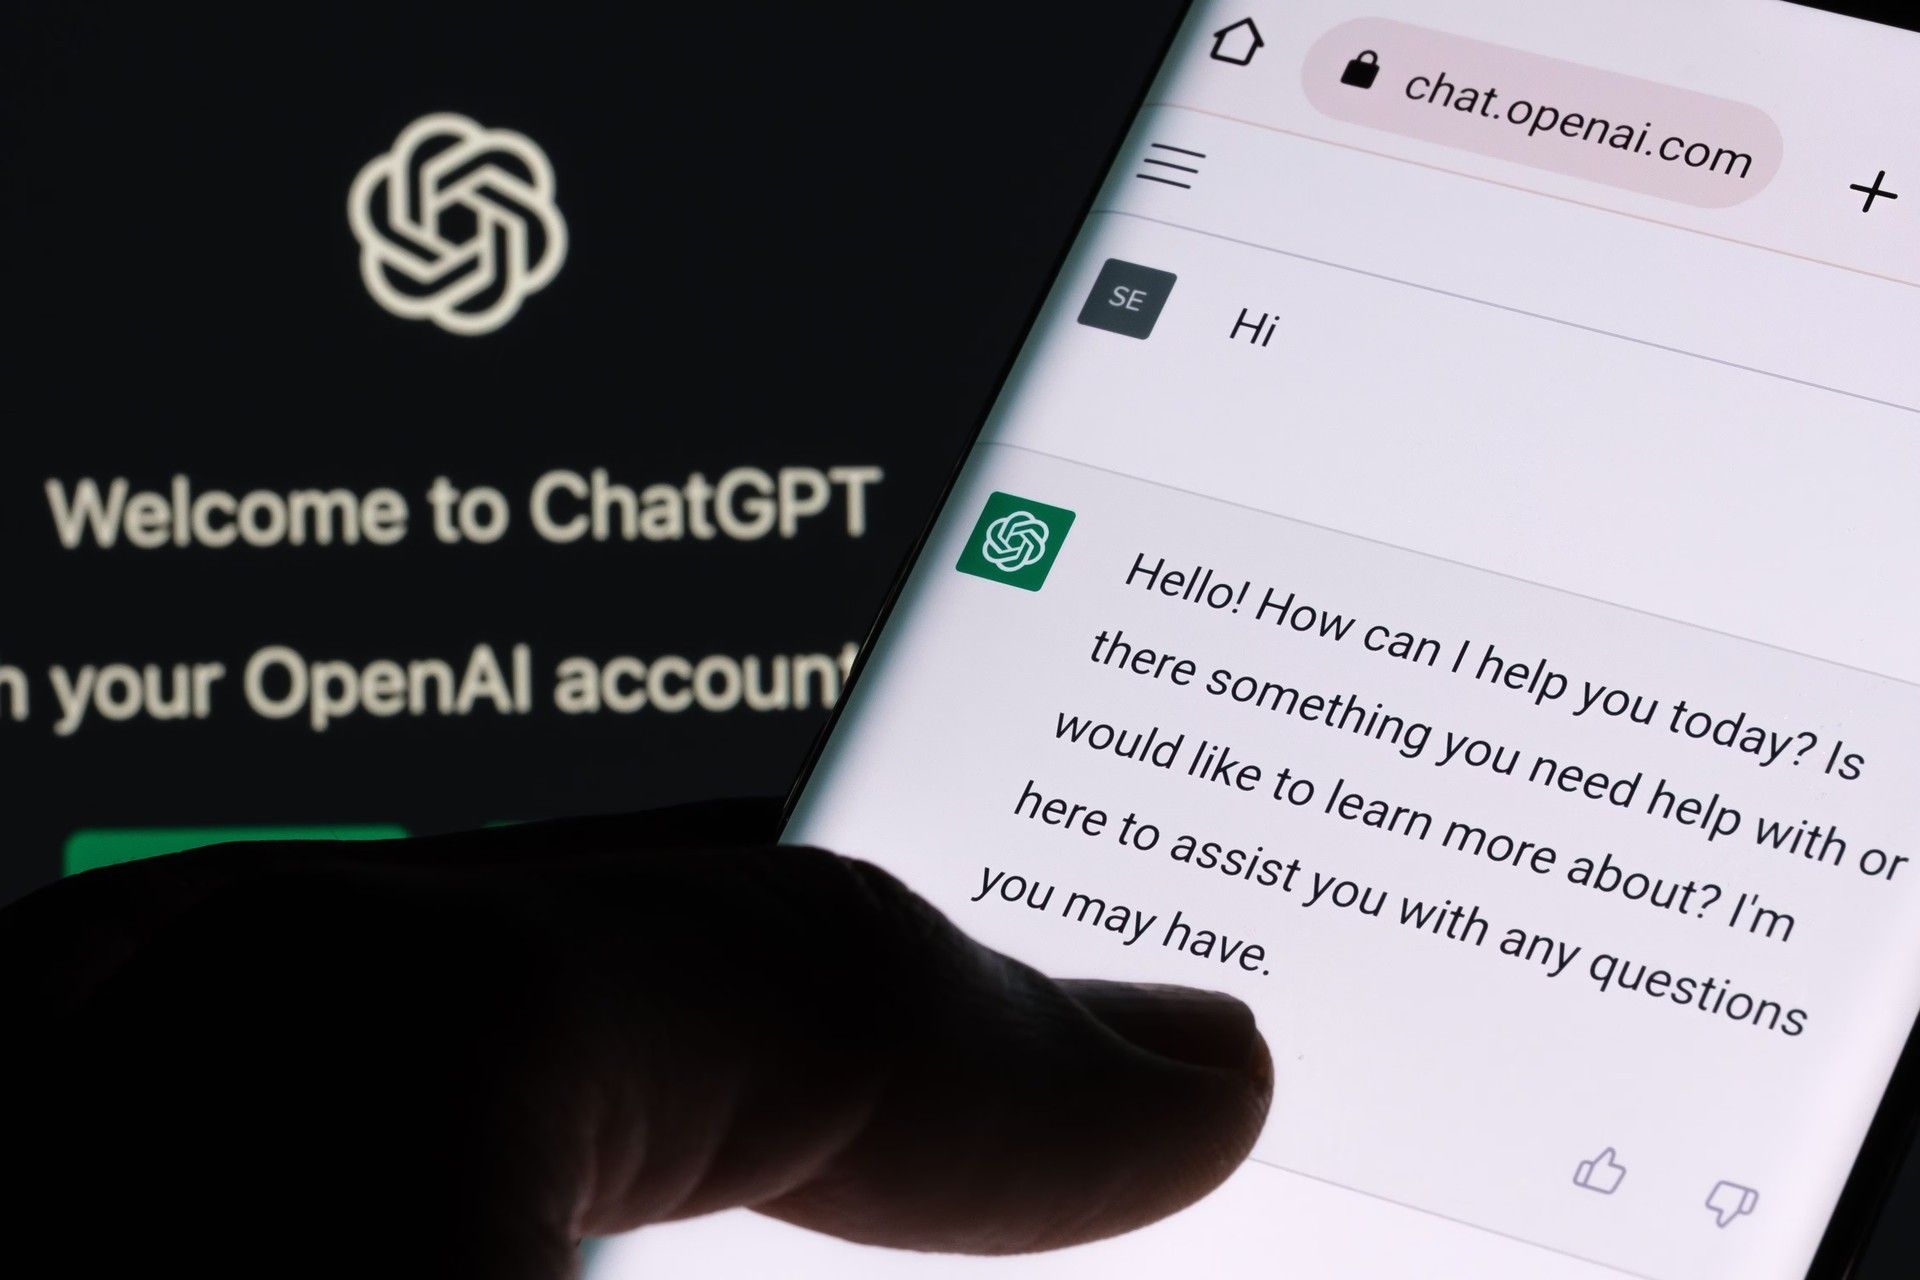 How to talk to ChatGPT